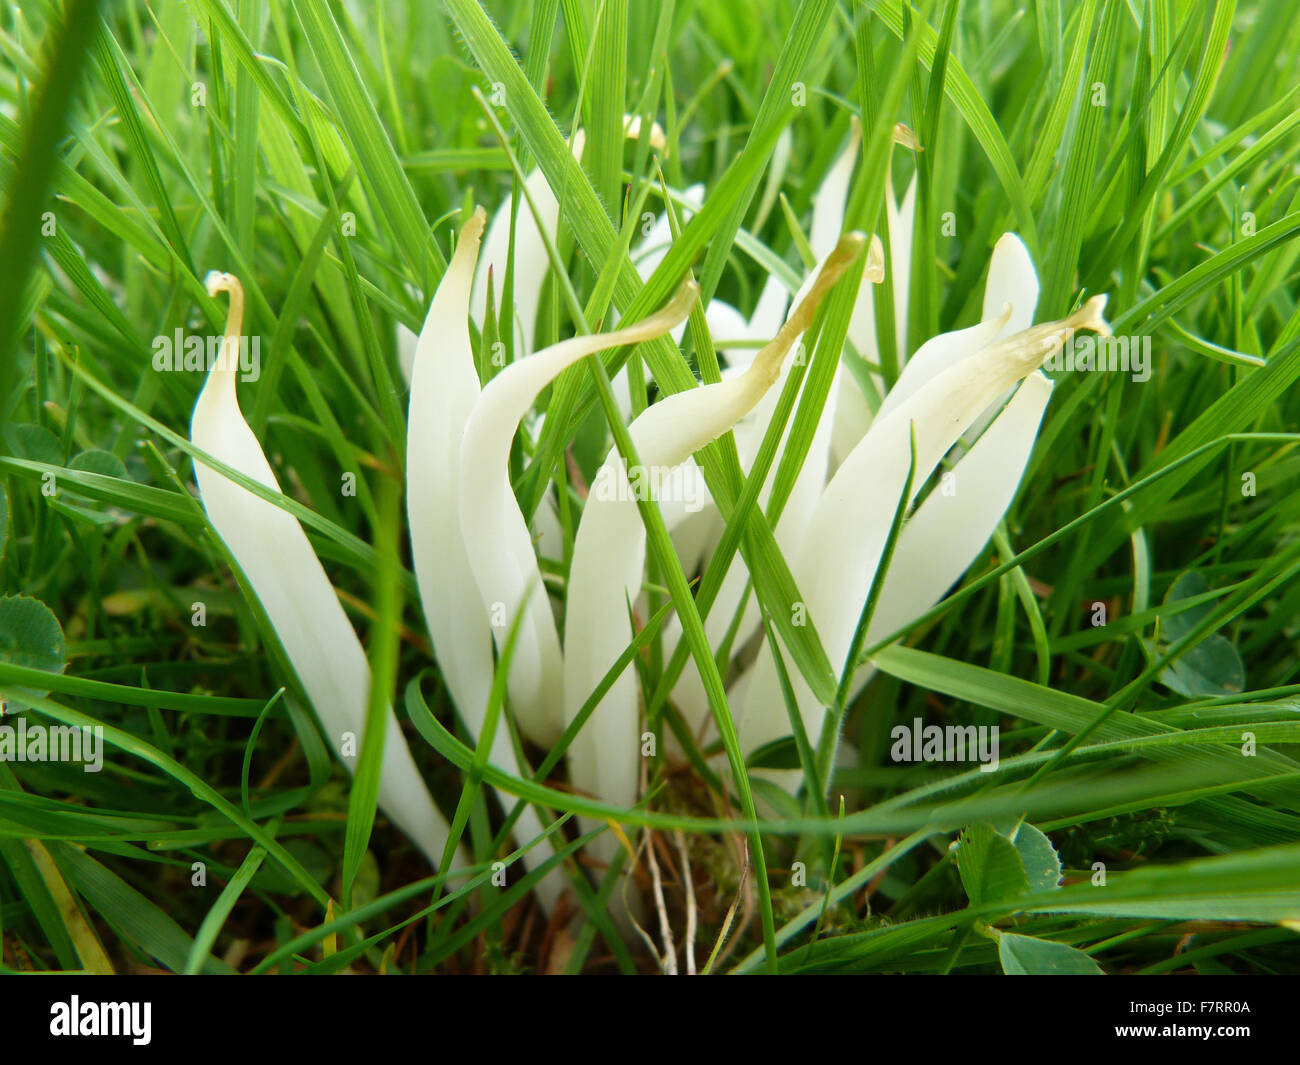 White spindles fungi growing in grass Stock Photo